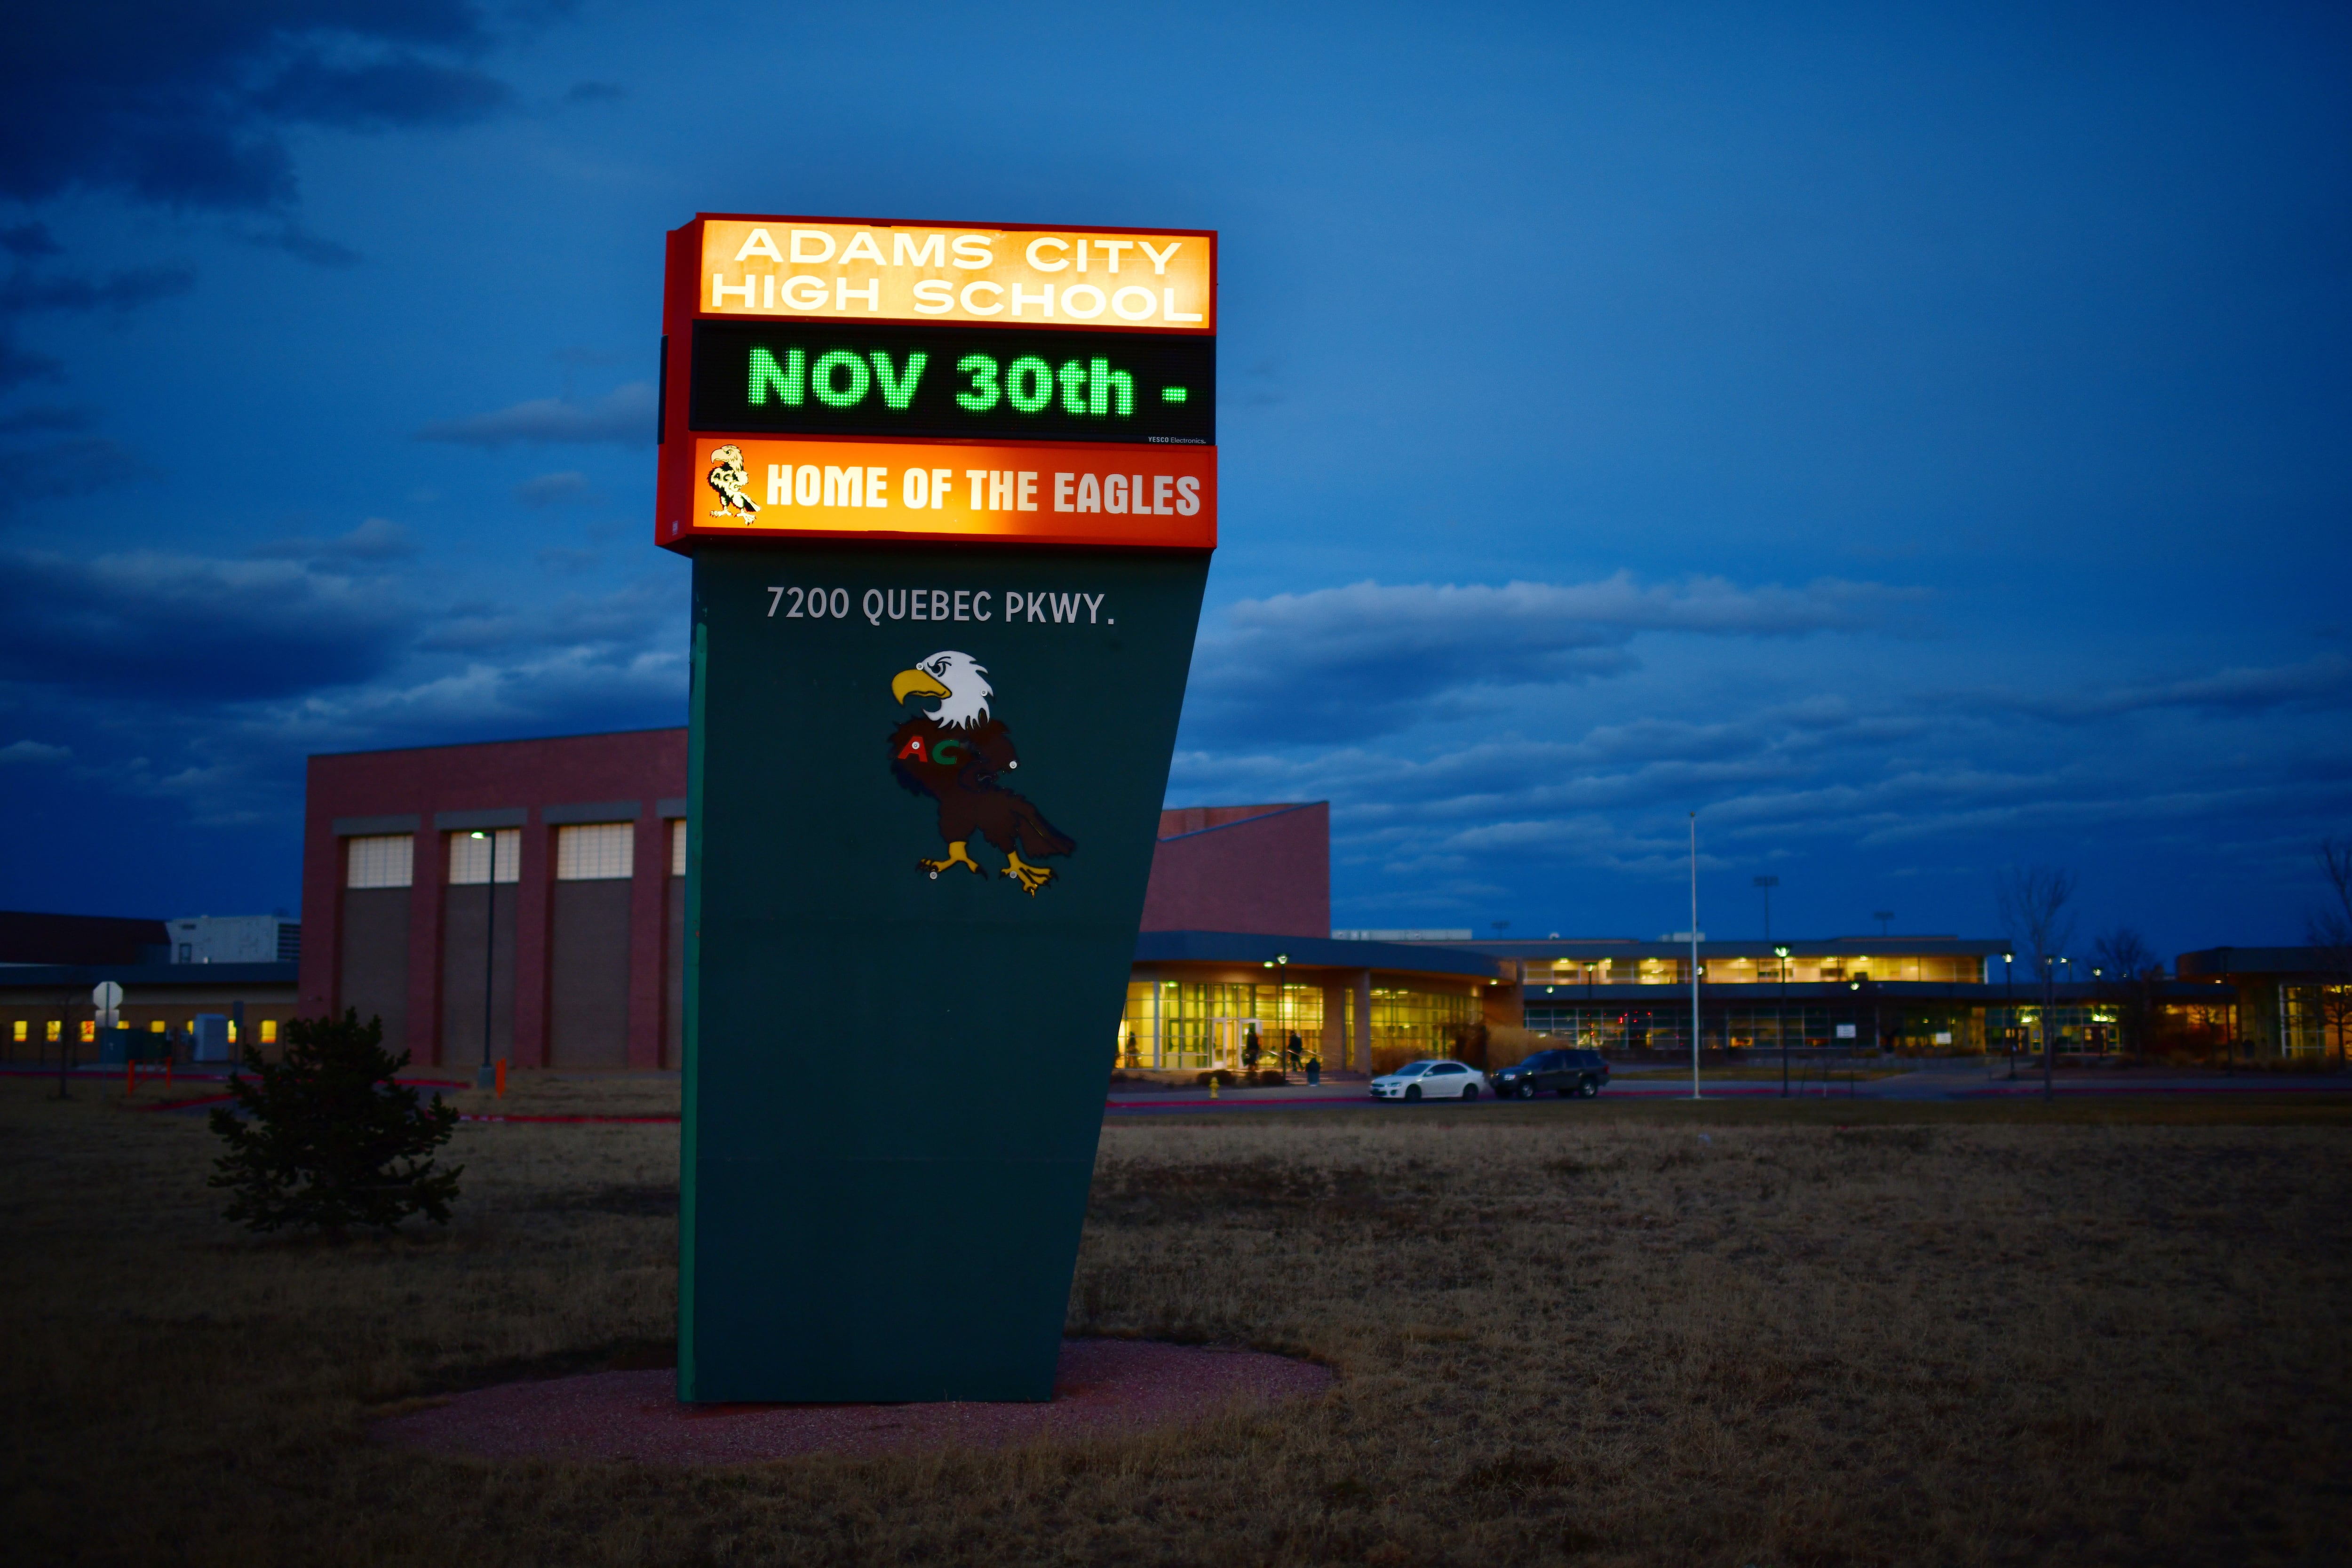 A brightly lit sign sits in front of Adams City High School against a dark blue sky.